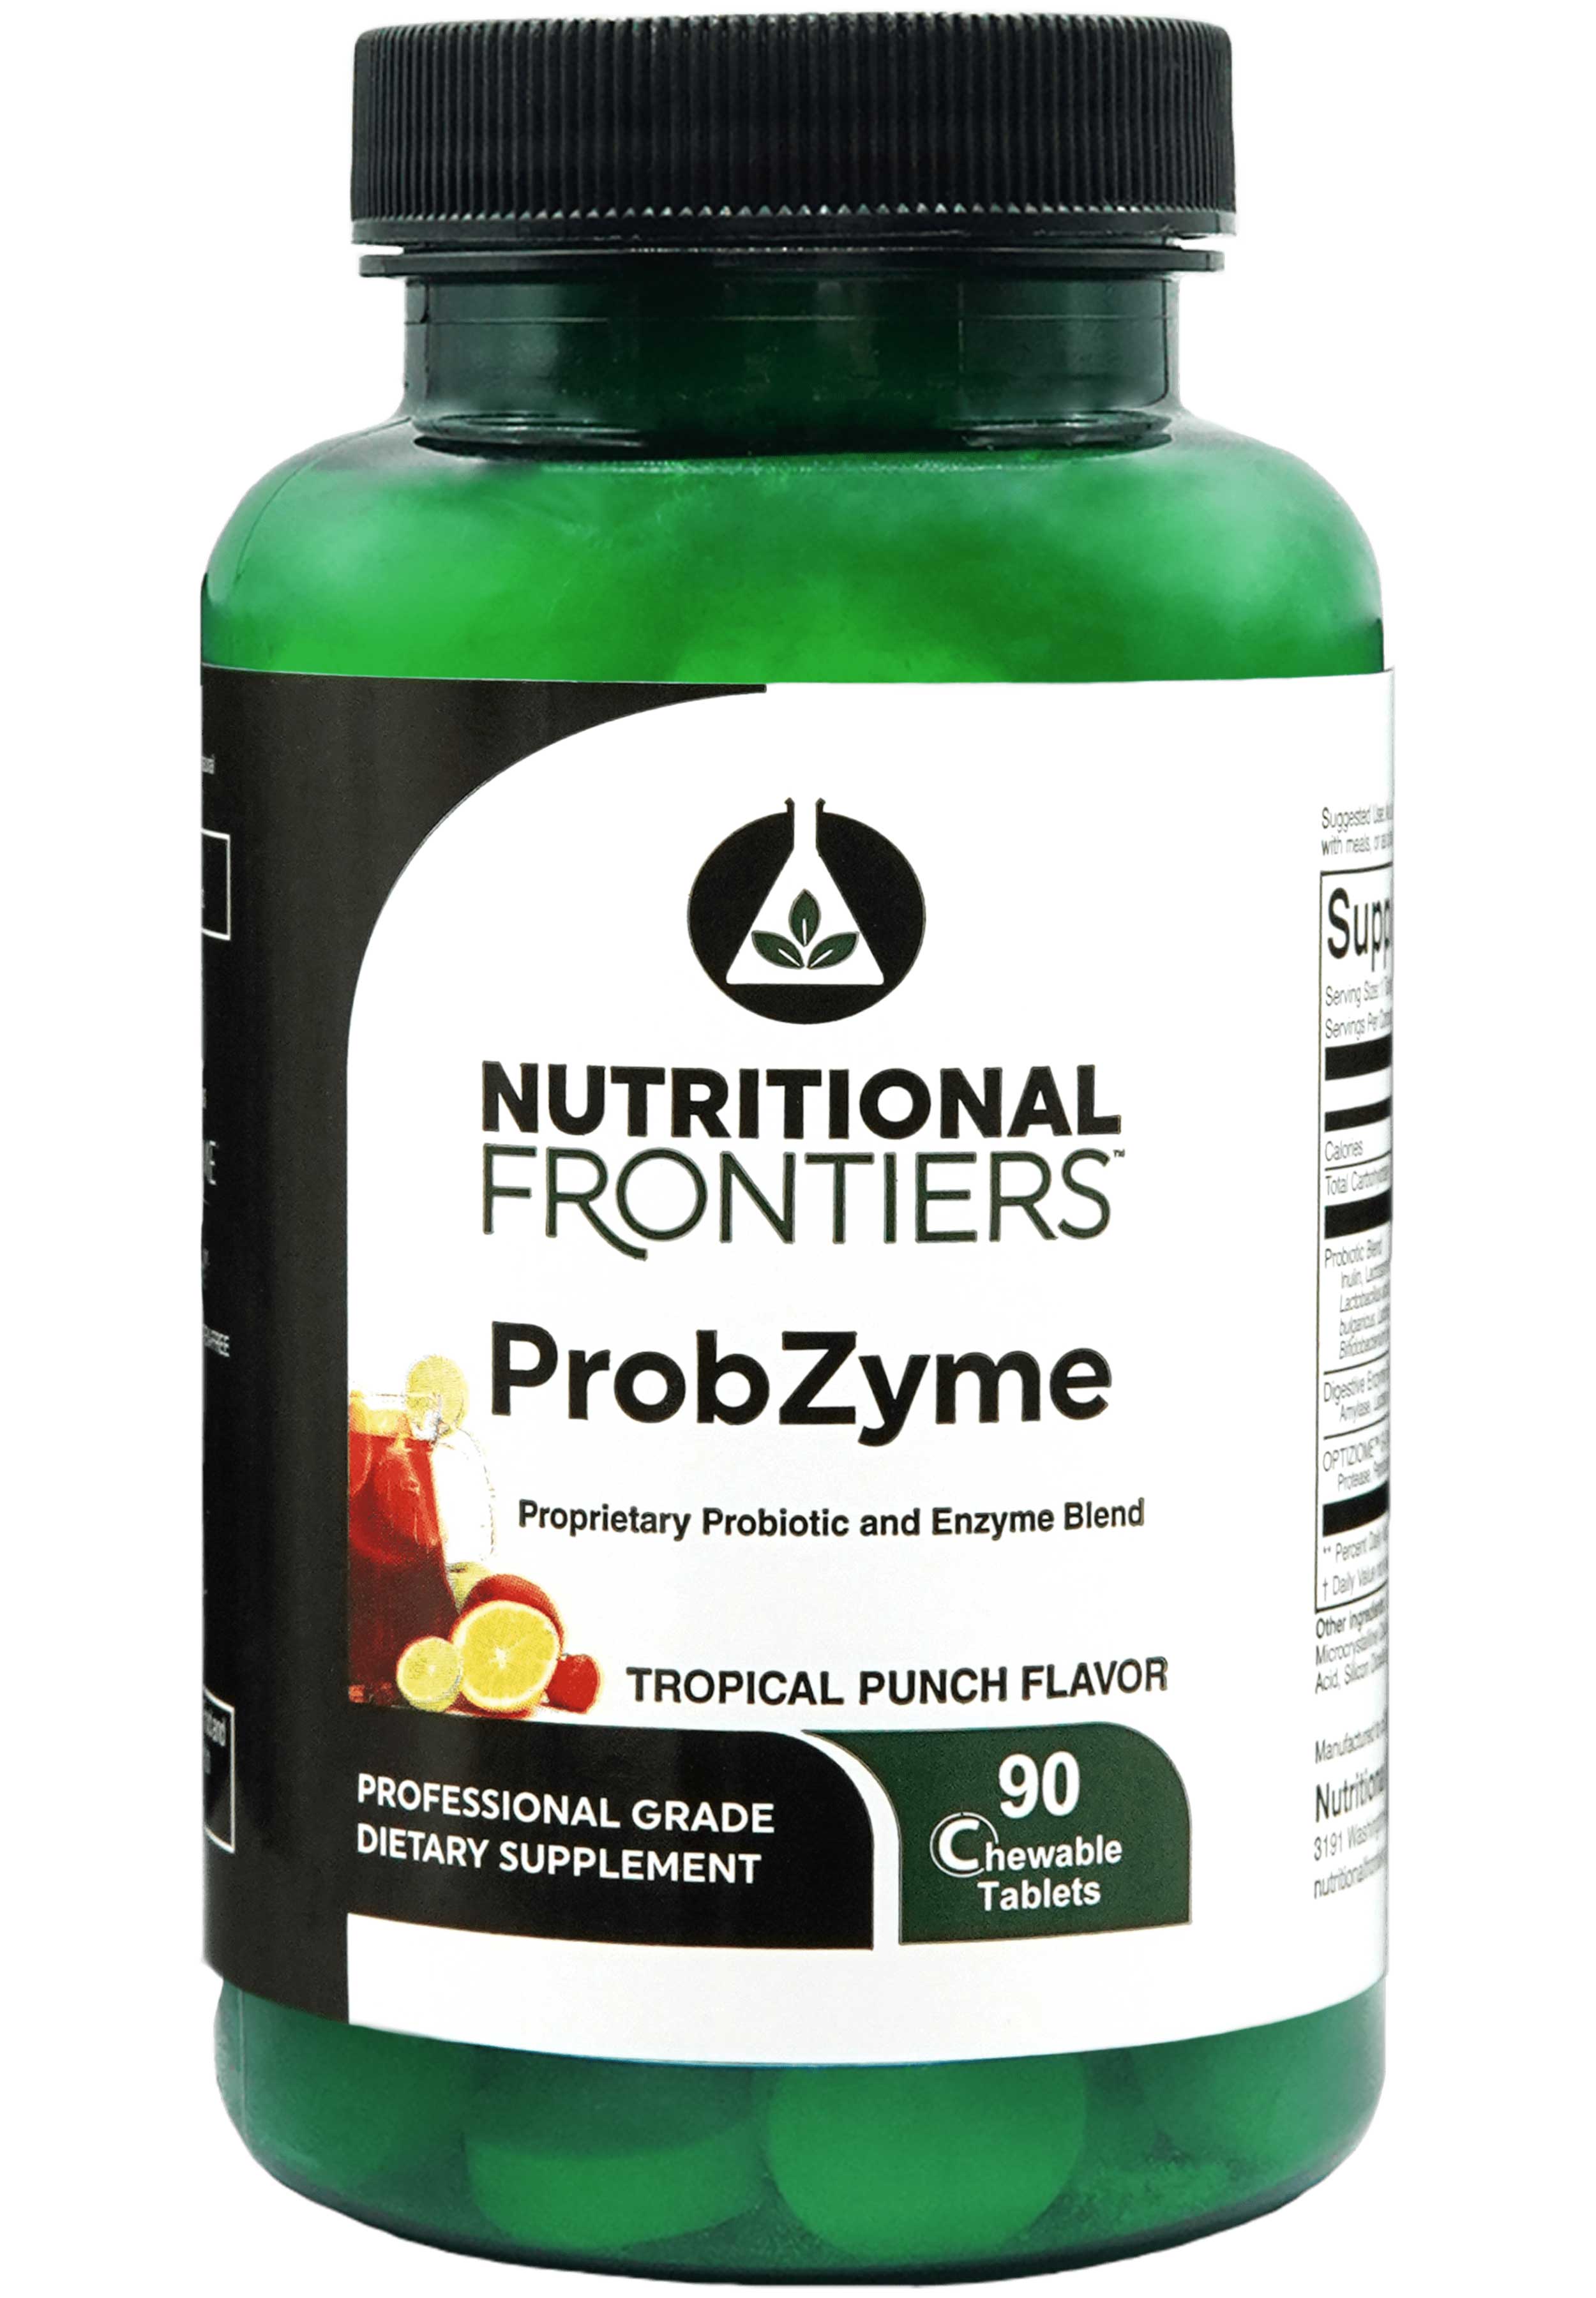 Nutritional Frontiers Probzyme Tropical Punch